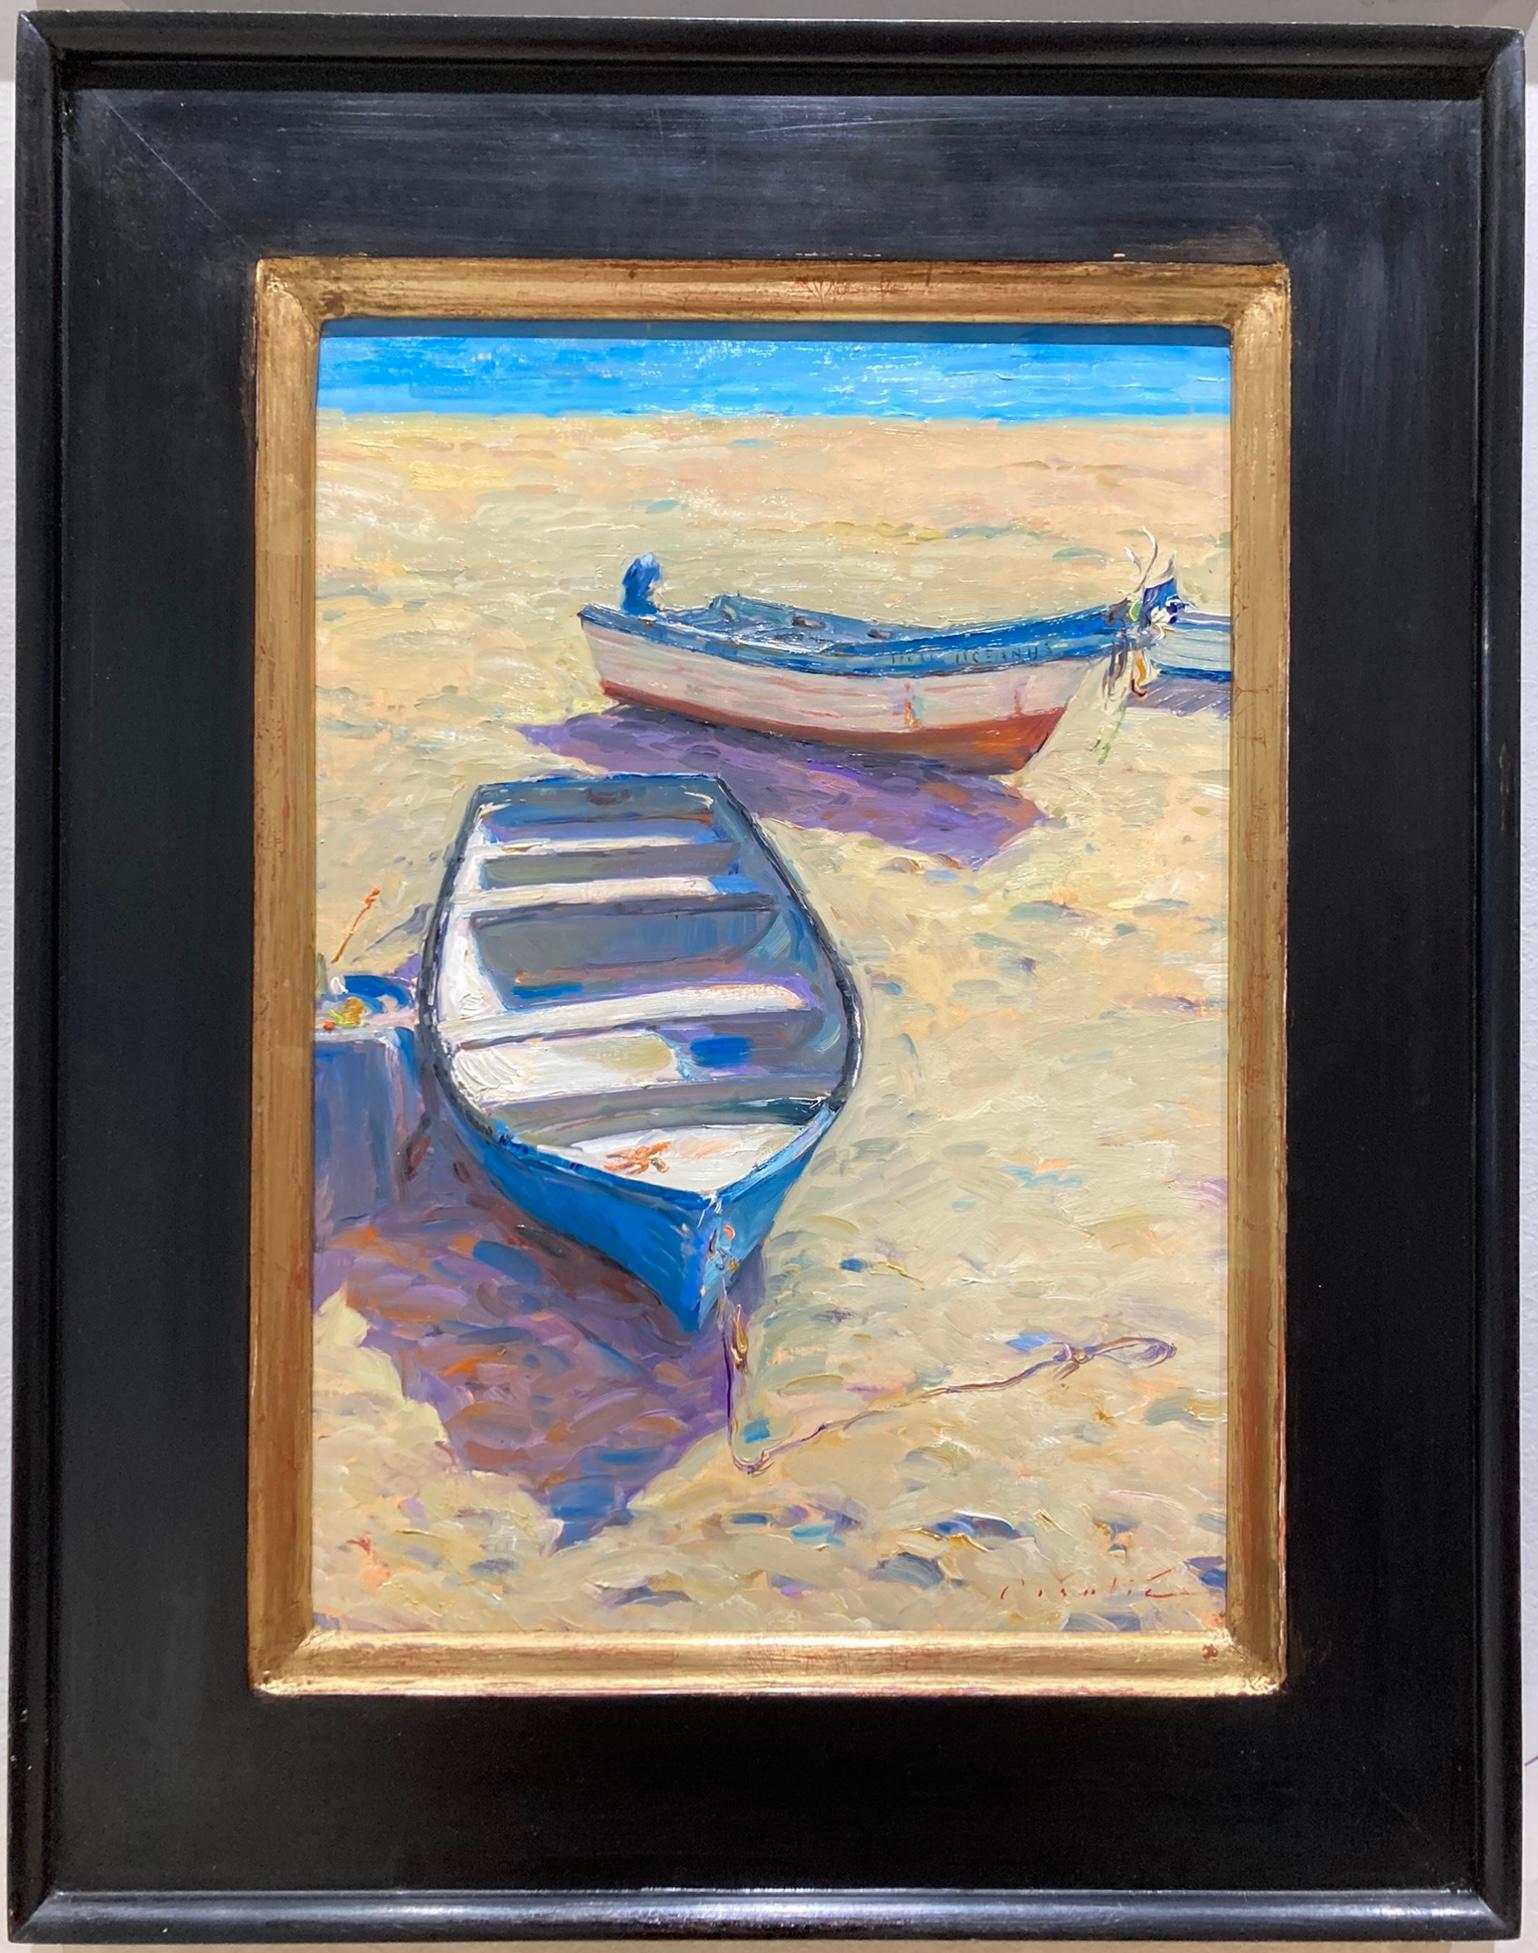 Fishing Boats, Salema - Painting by Tina Orsolic Dalessio